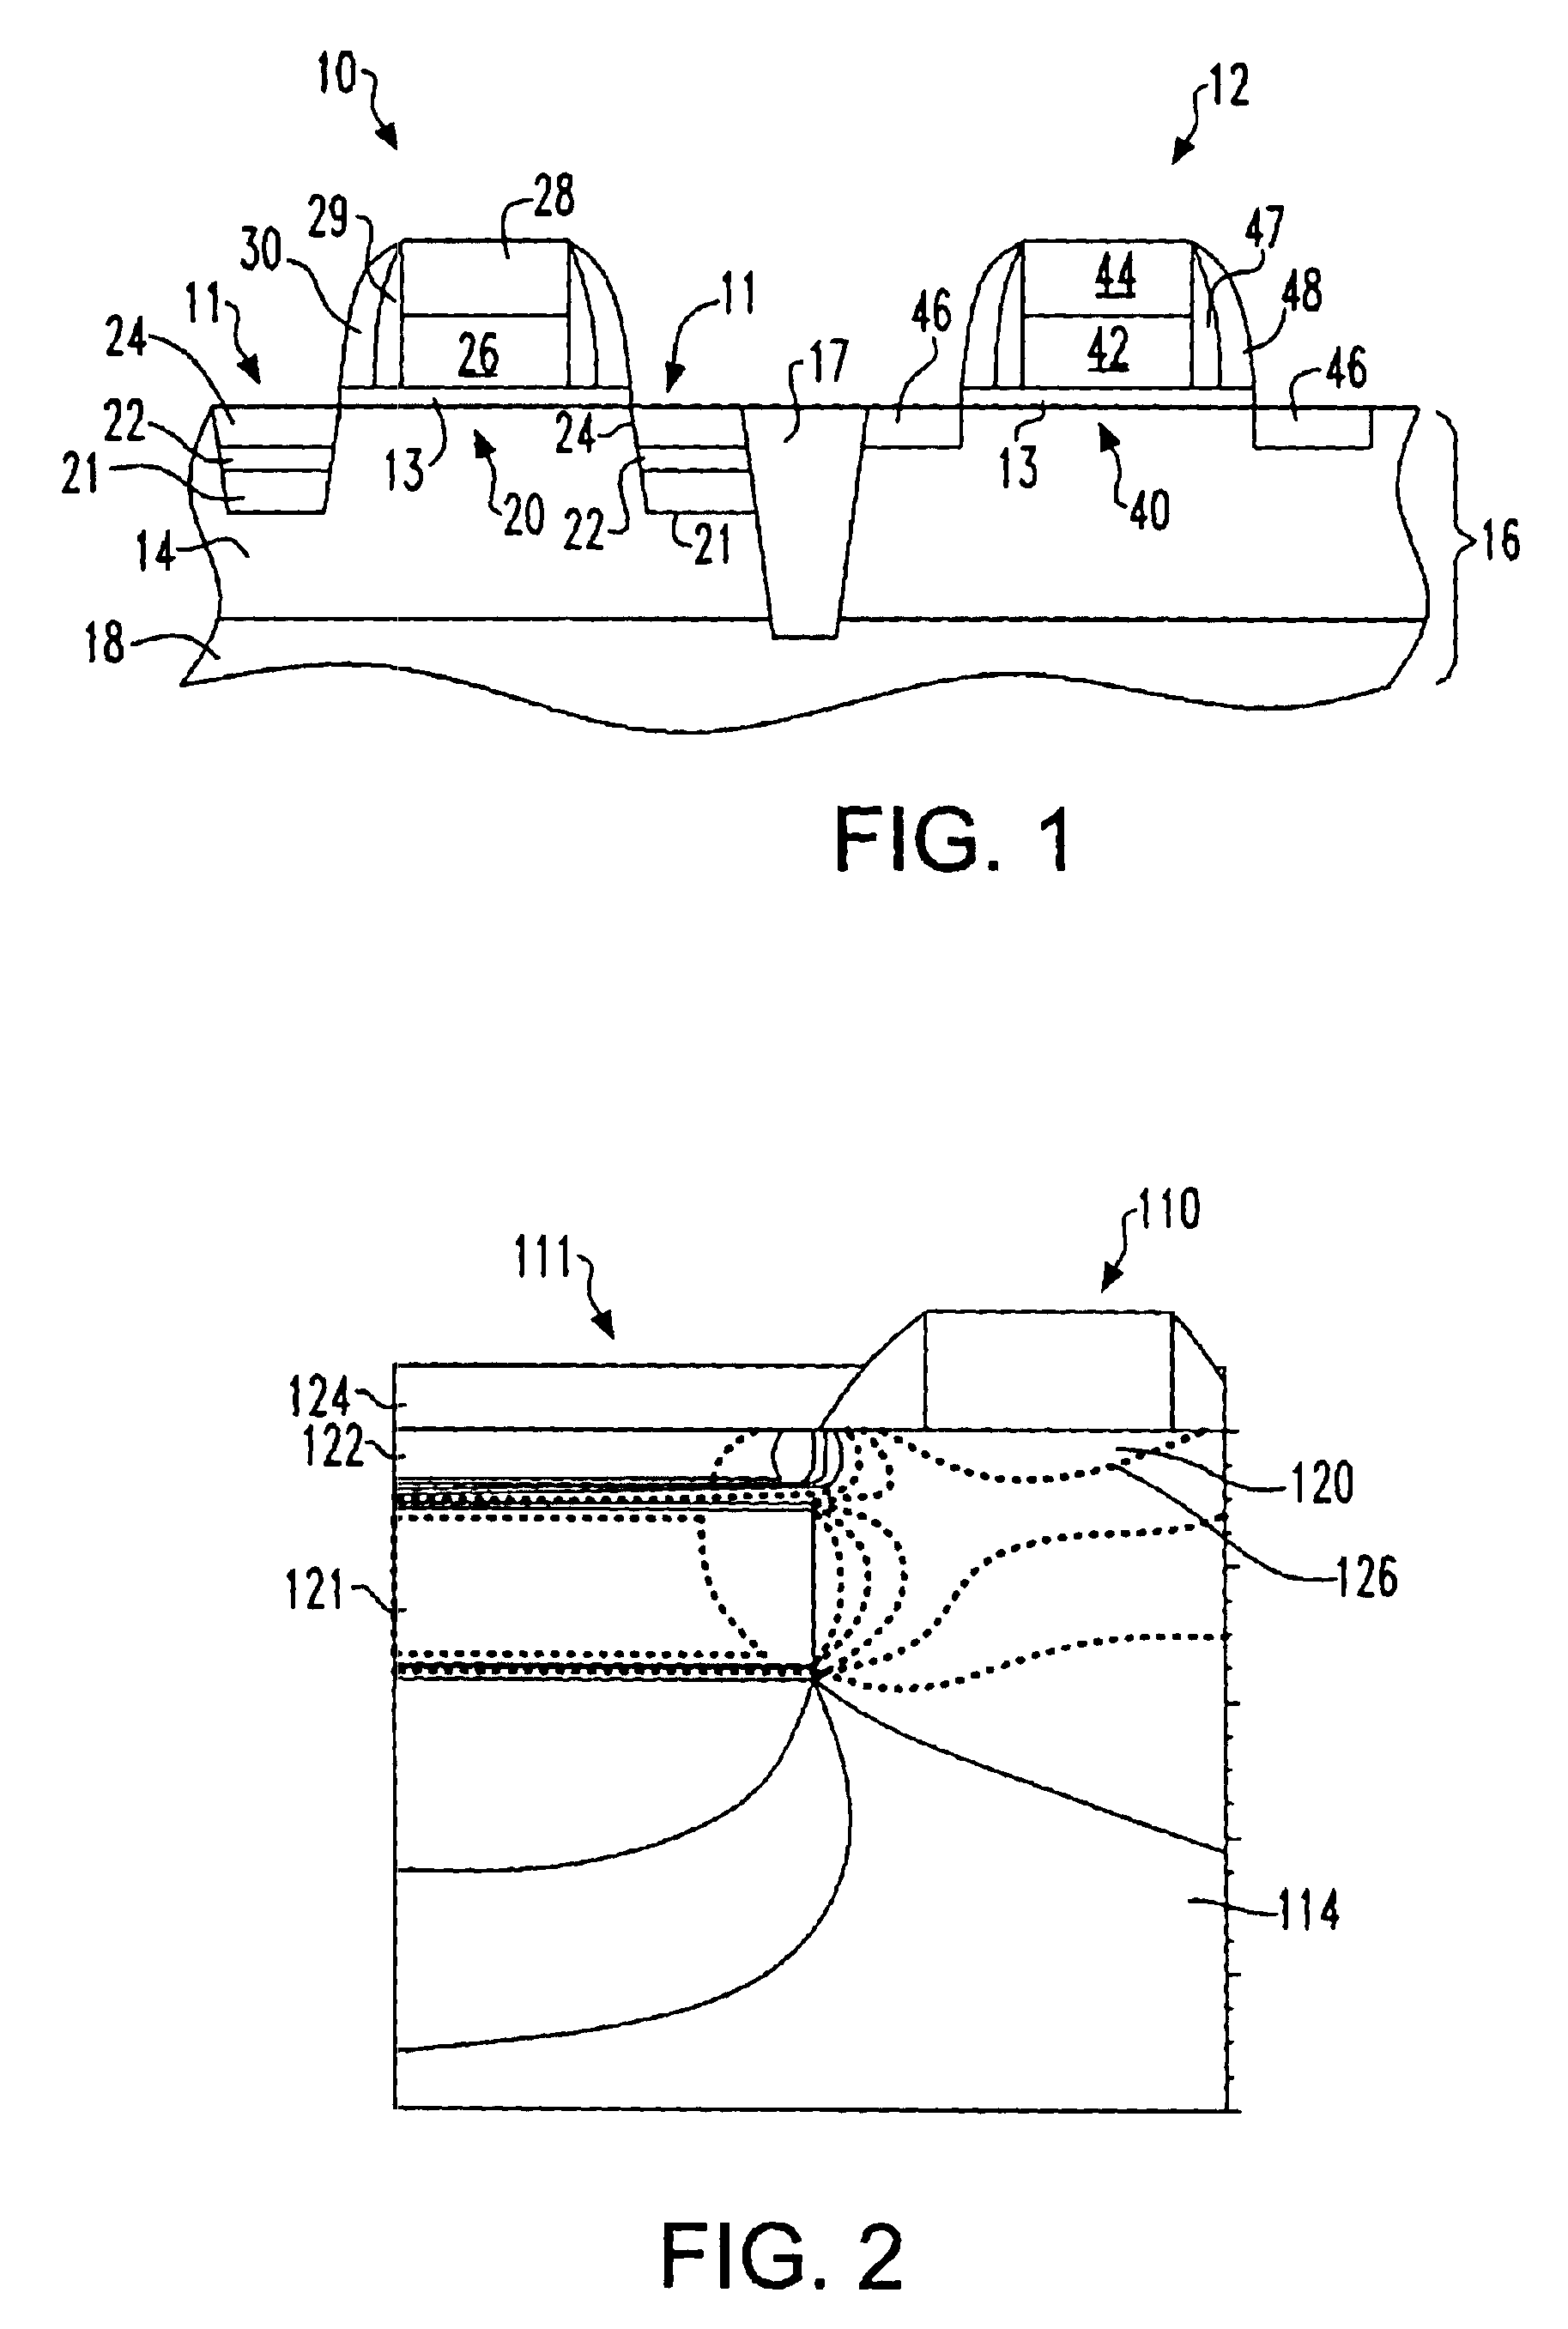 Structure and method of making strained semiconductor CMOS transistors having lattice-mismatched semiconductor regions underlying source and drain regions